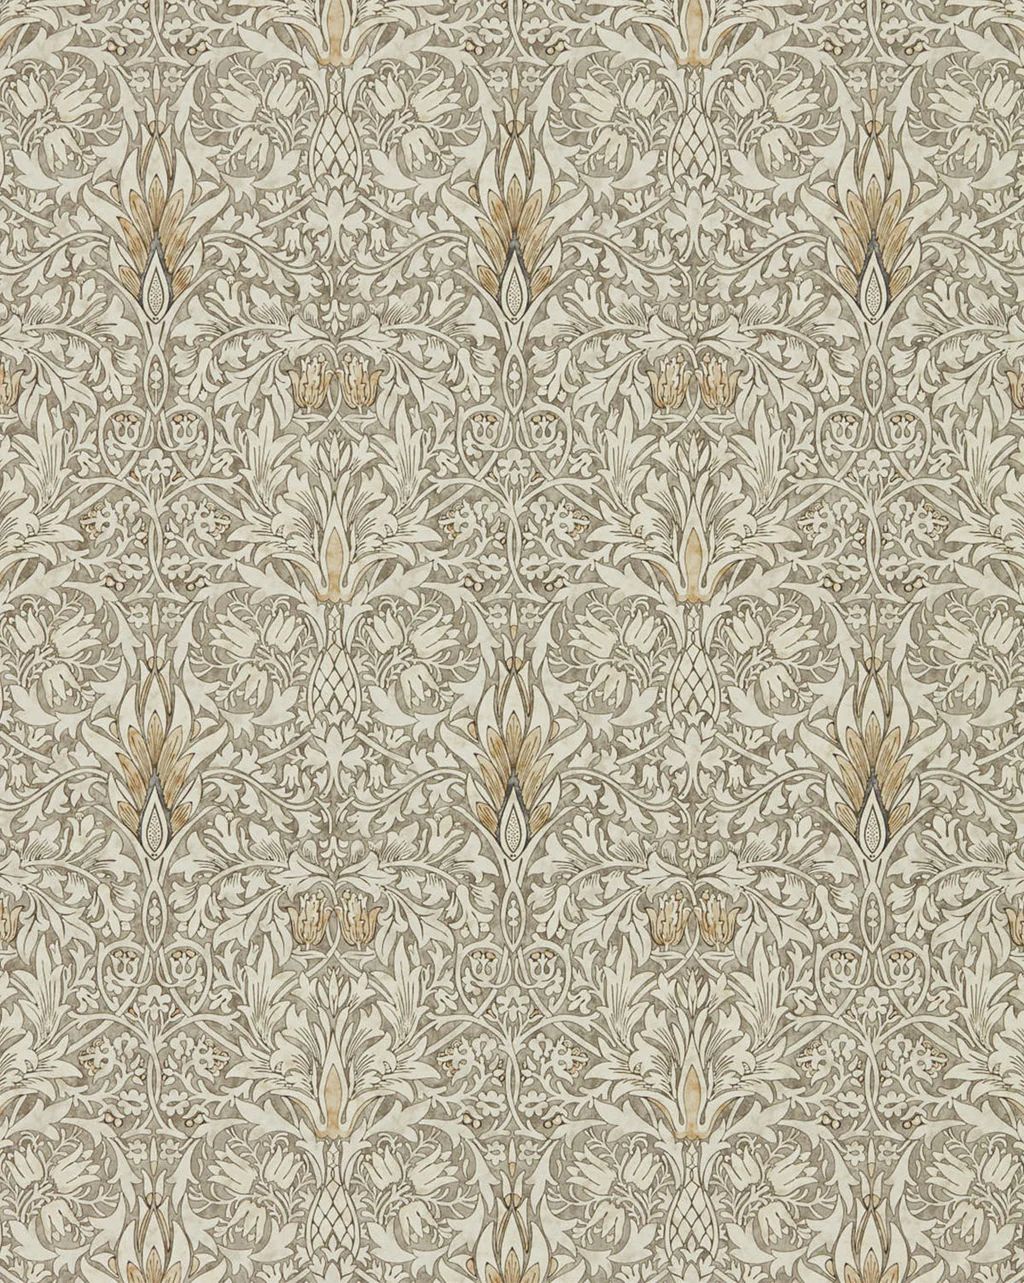 Snakeshead Wallpaper By Morris & Co. | McGee & Co.